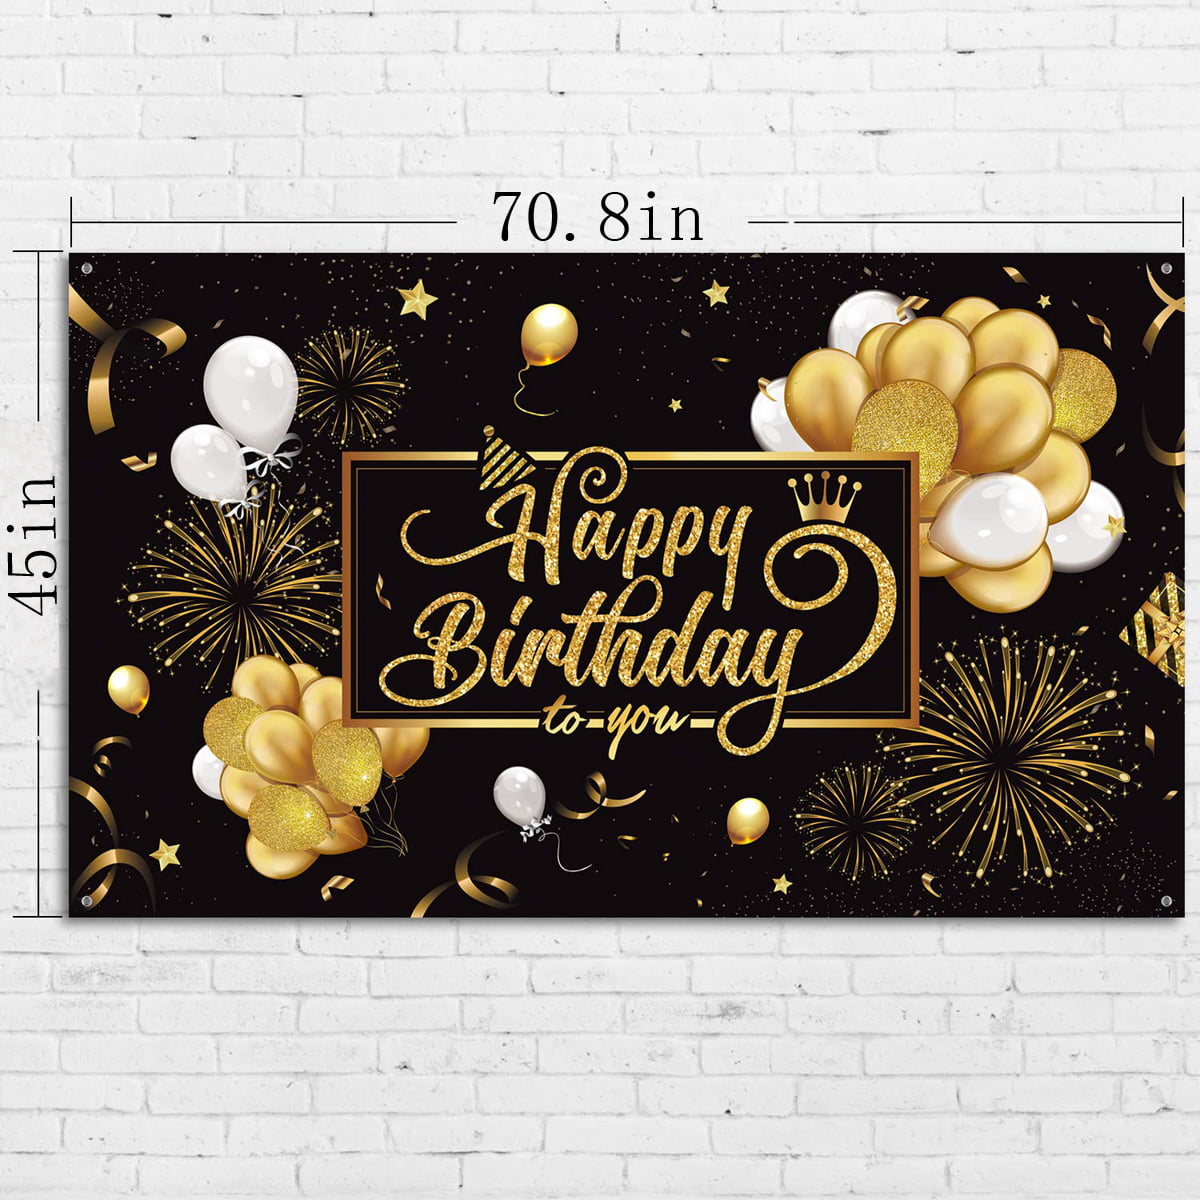 LARGE BIRTHDAY FOOTBALL POSTER BANNER PERSONALISED ANY COLOUR TEXT AGE ETC 